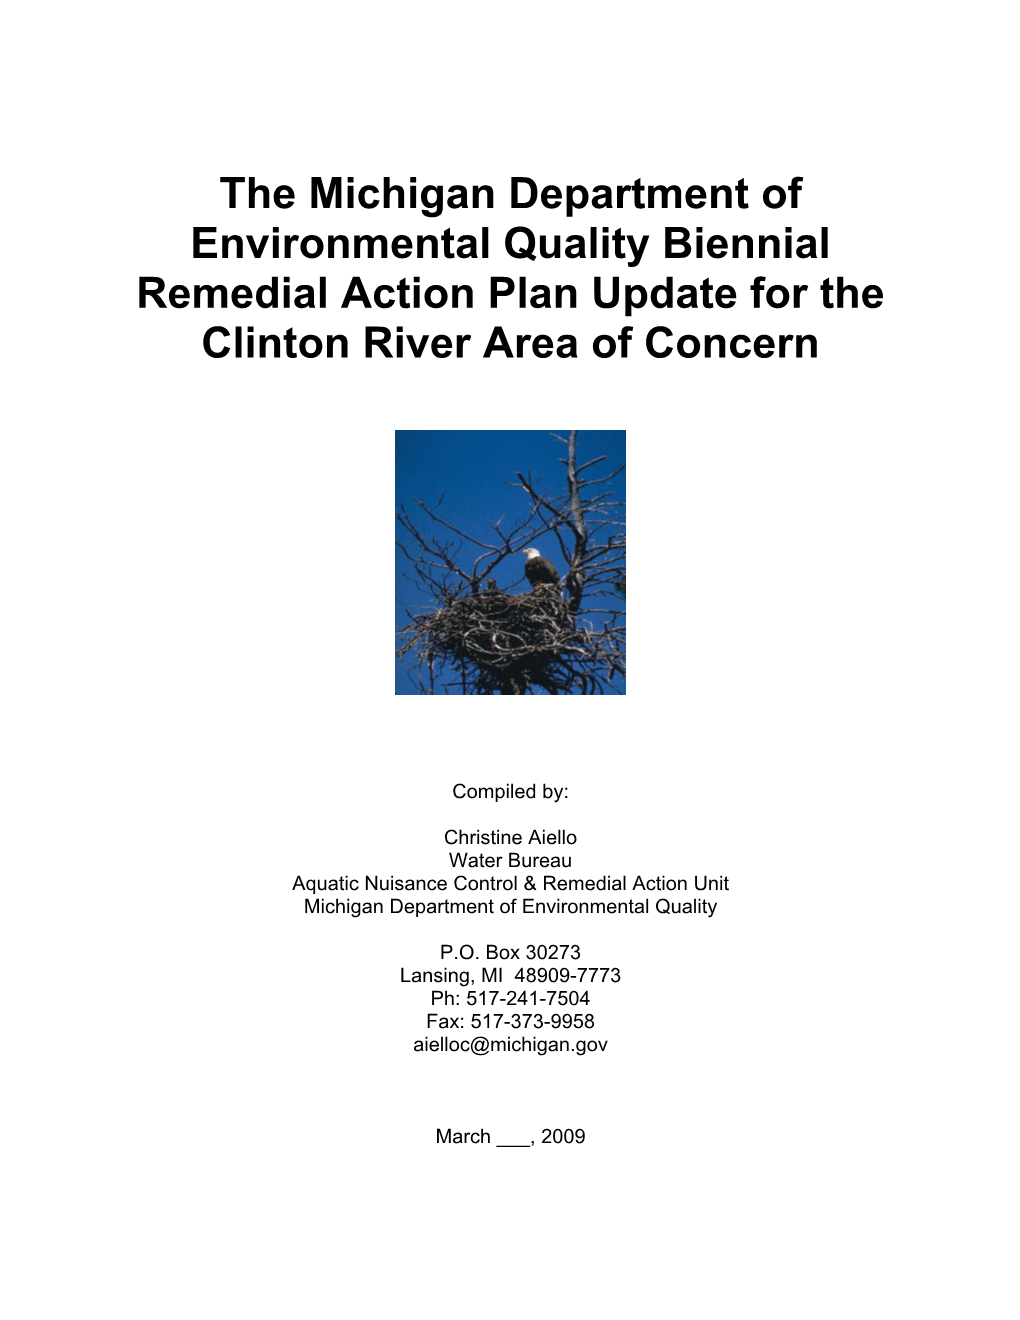 Clinton River Remedial Action Plan Update